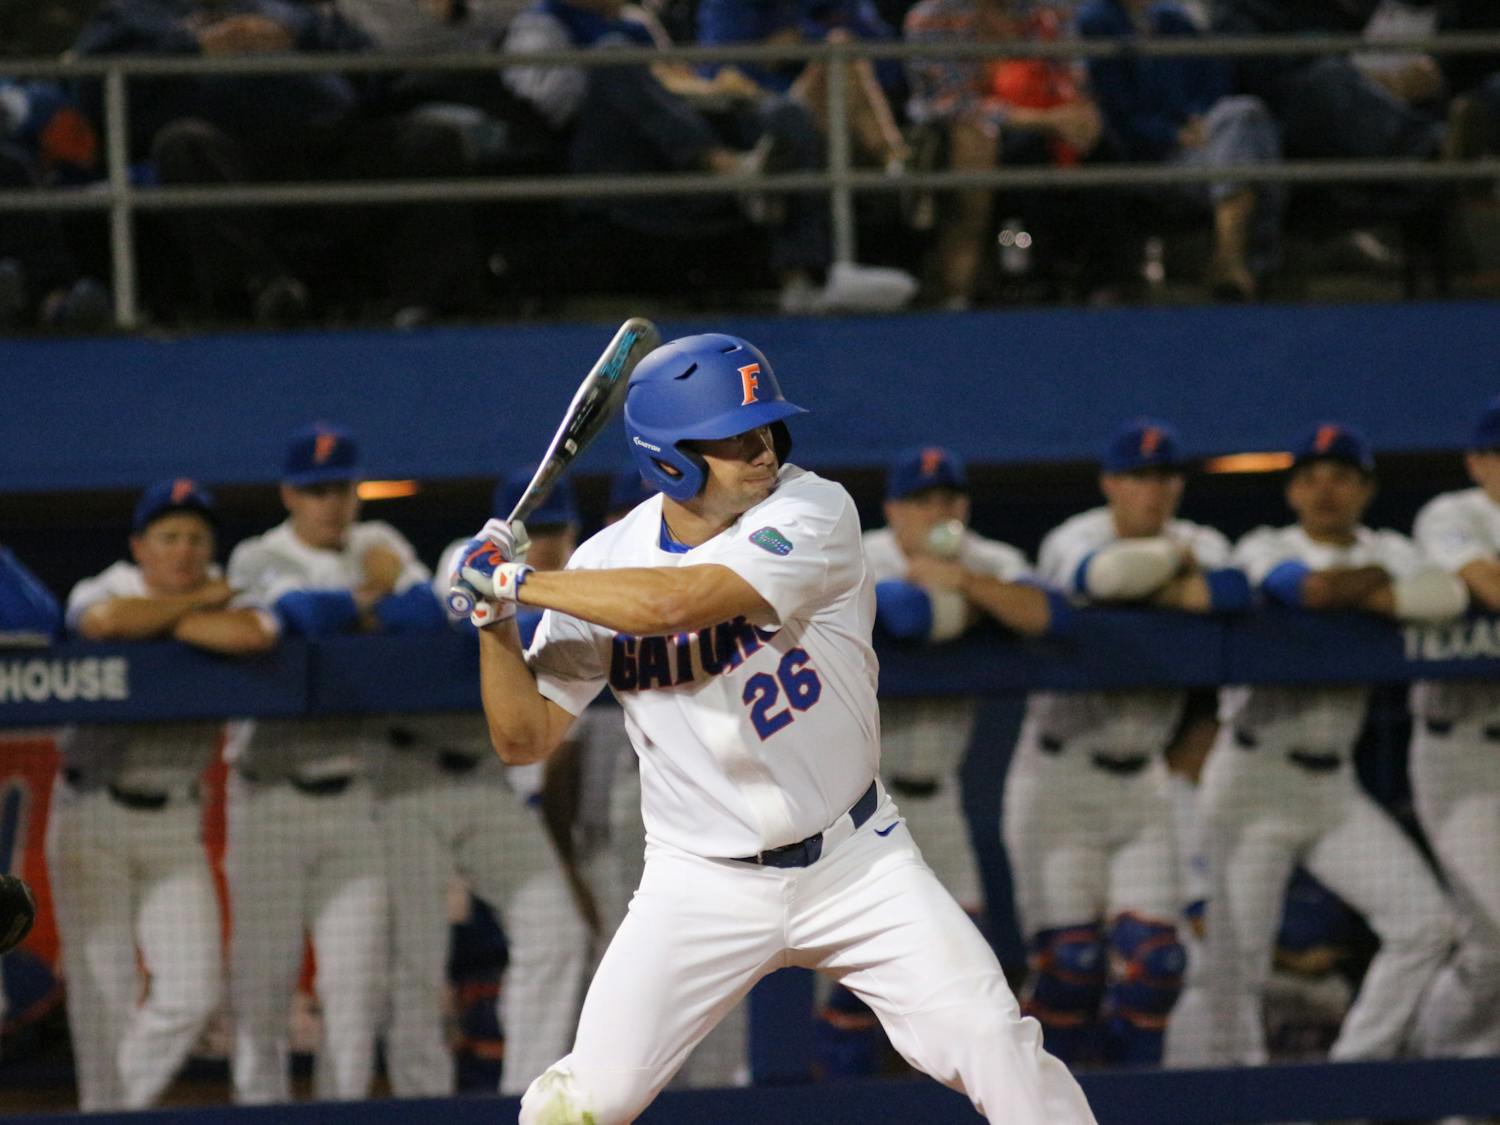 Florida center fielder Nick Horvath went 3-for-4, notched two RBIs and scored two runs on Tuesday against Florida State in a 12-6 win for the Gators.